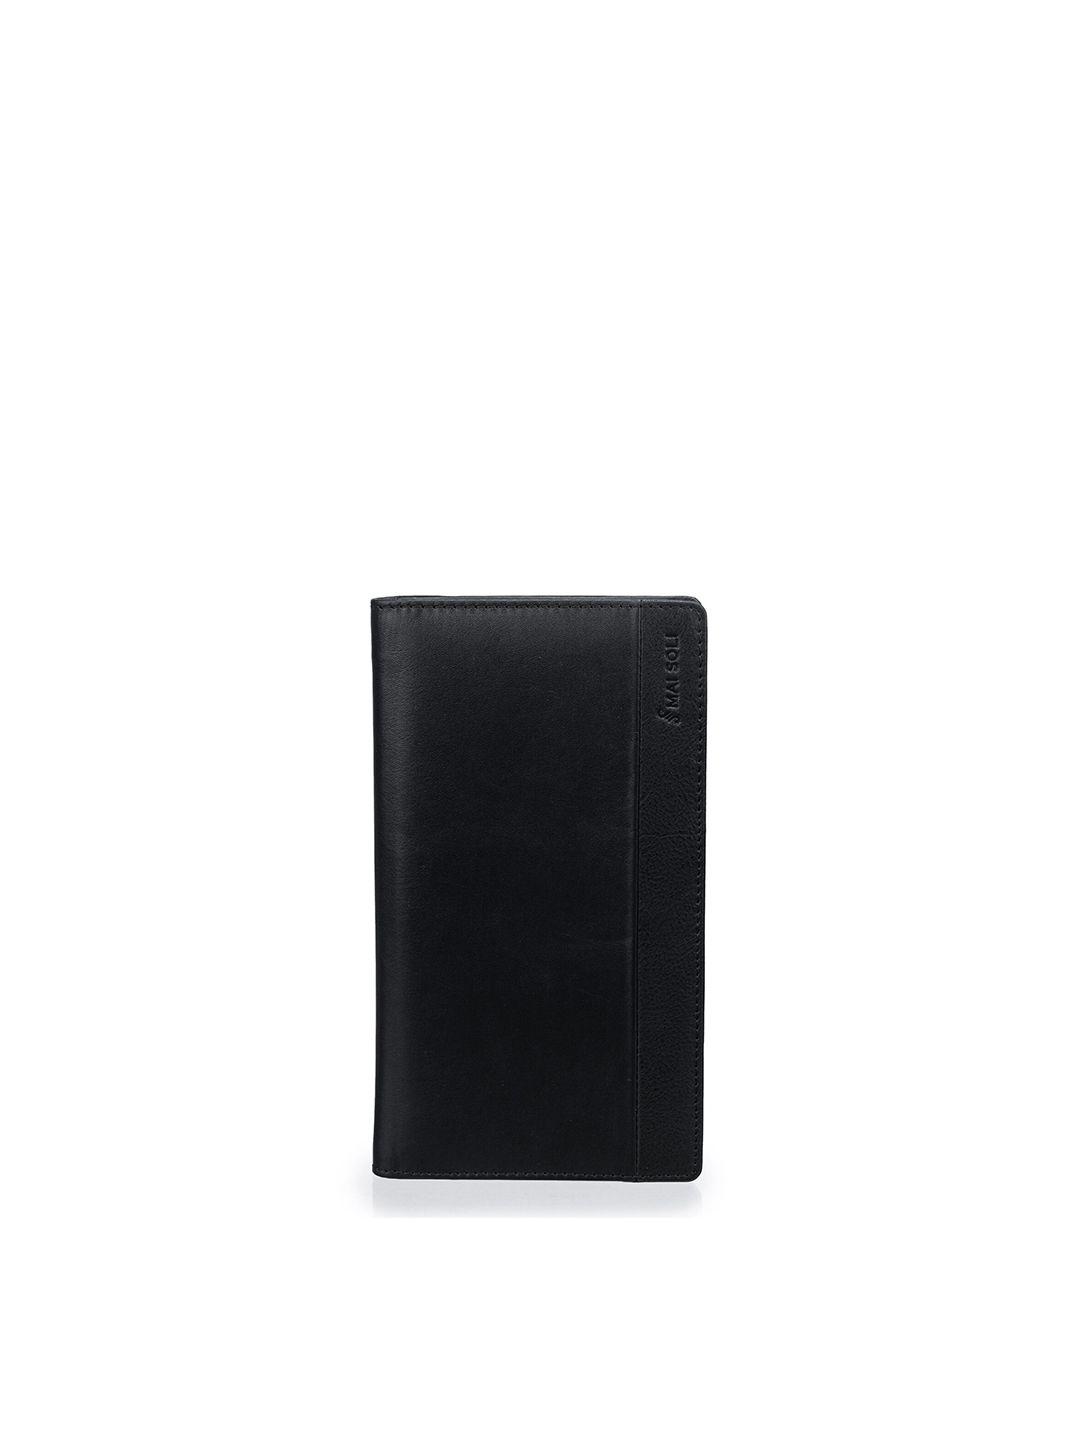 mai soli leather passport holder with sd card holder